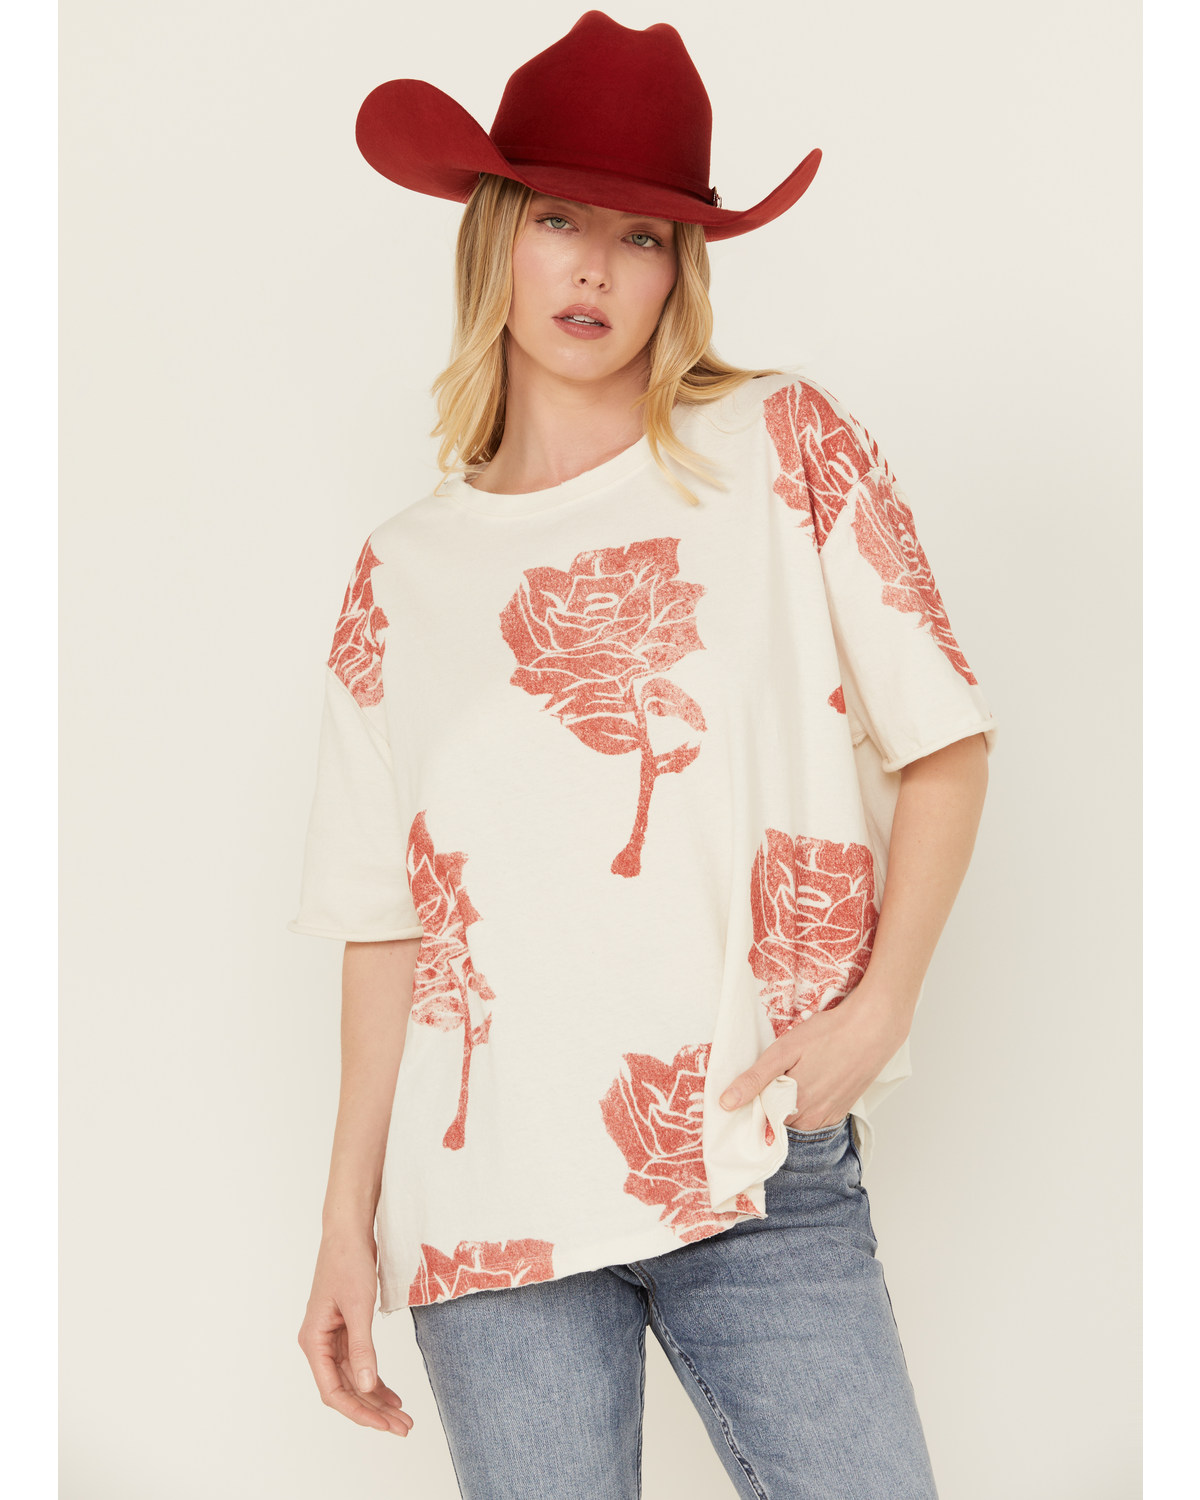 Free People Women's We The Painted Floral Short Sleeve Graphic Tee